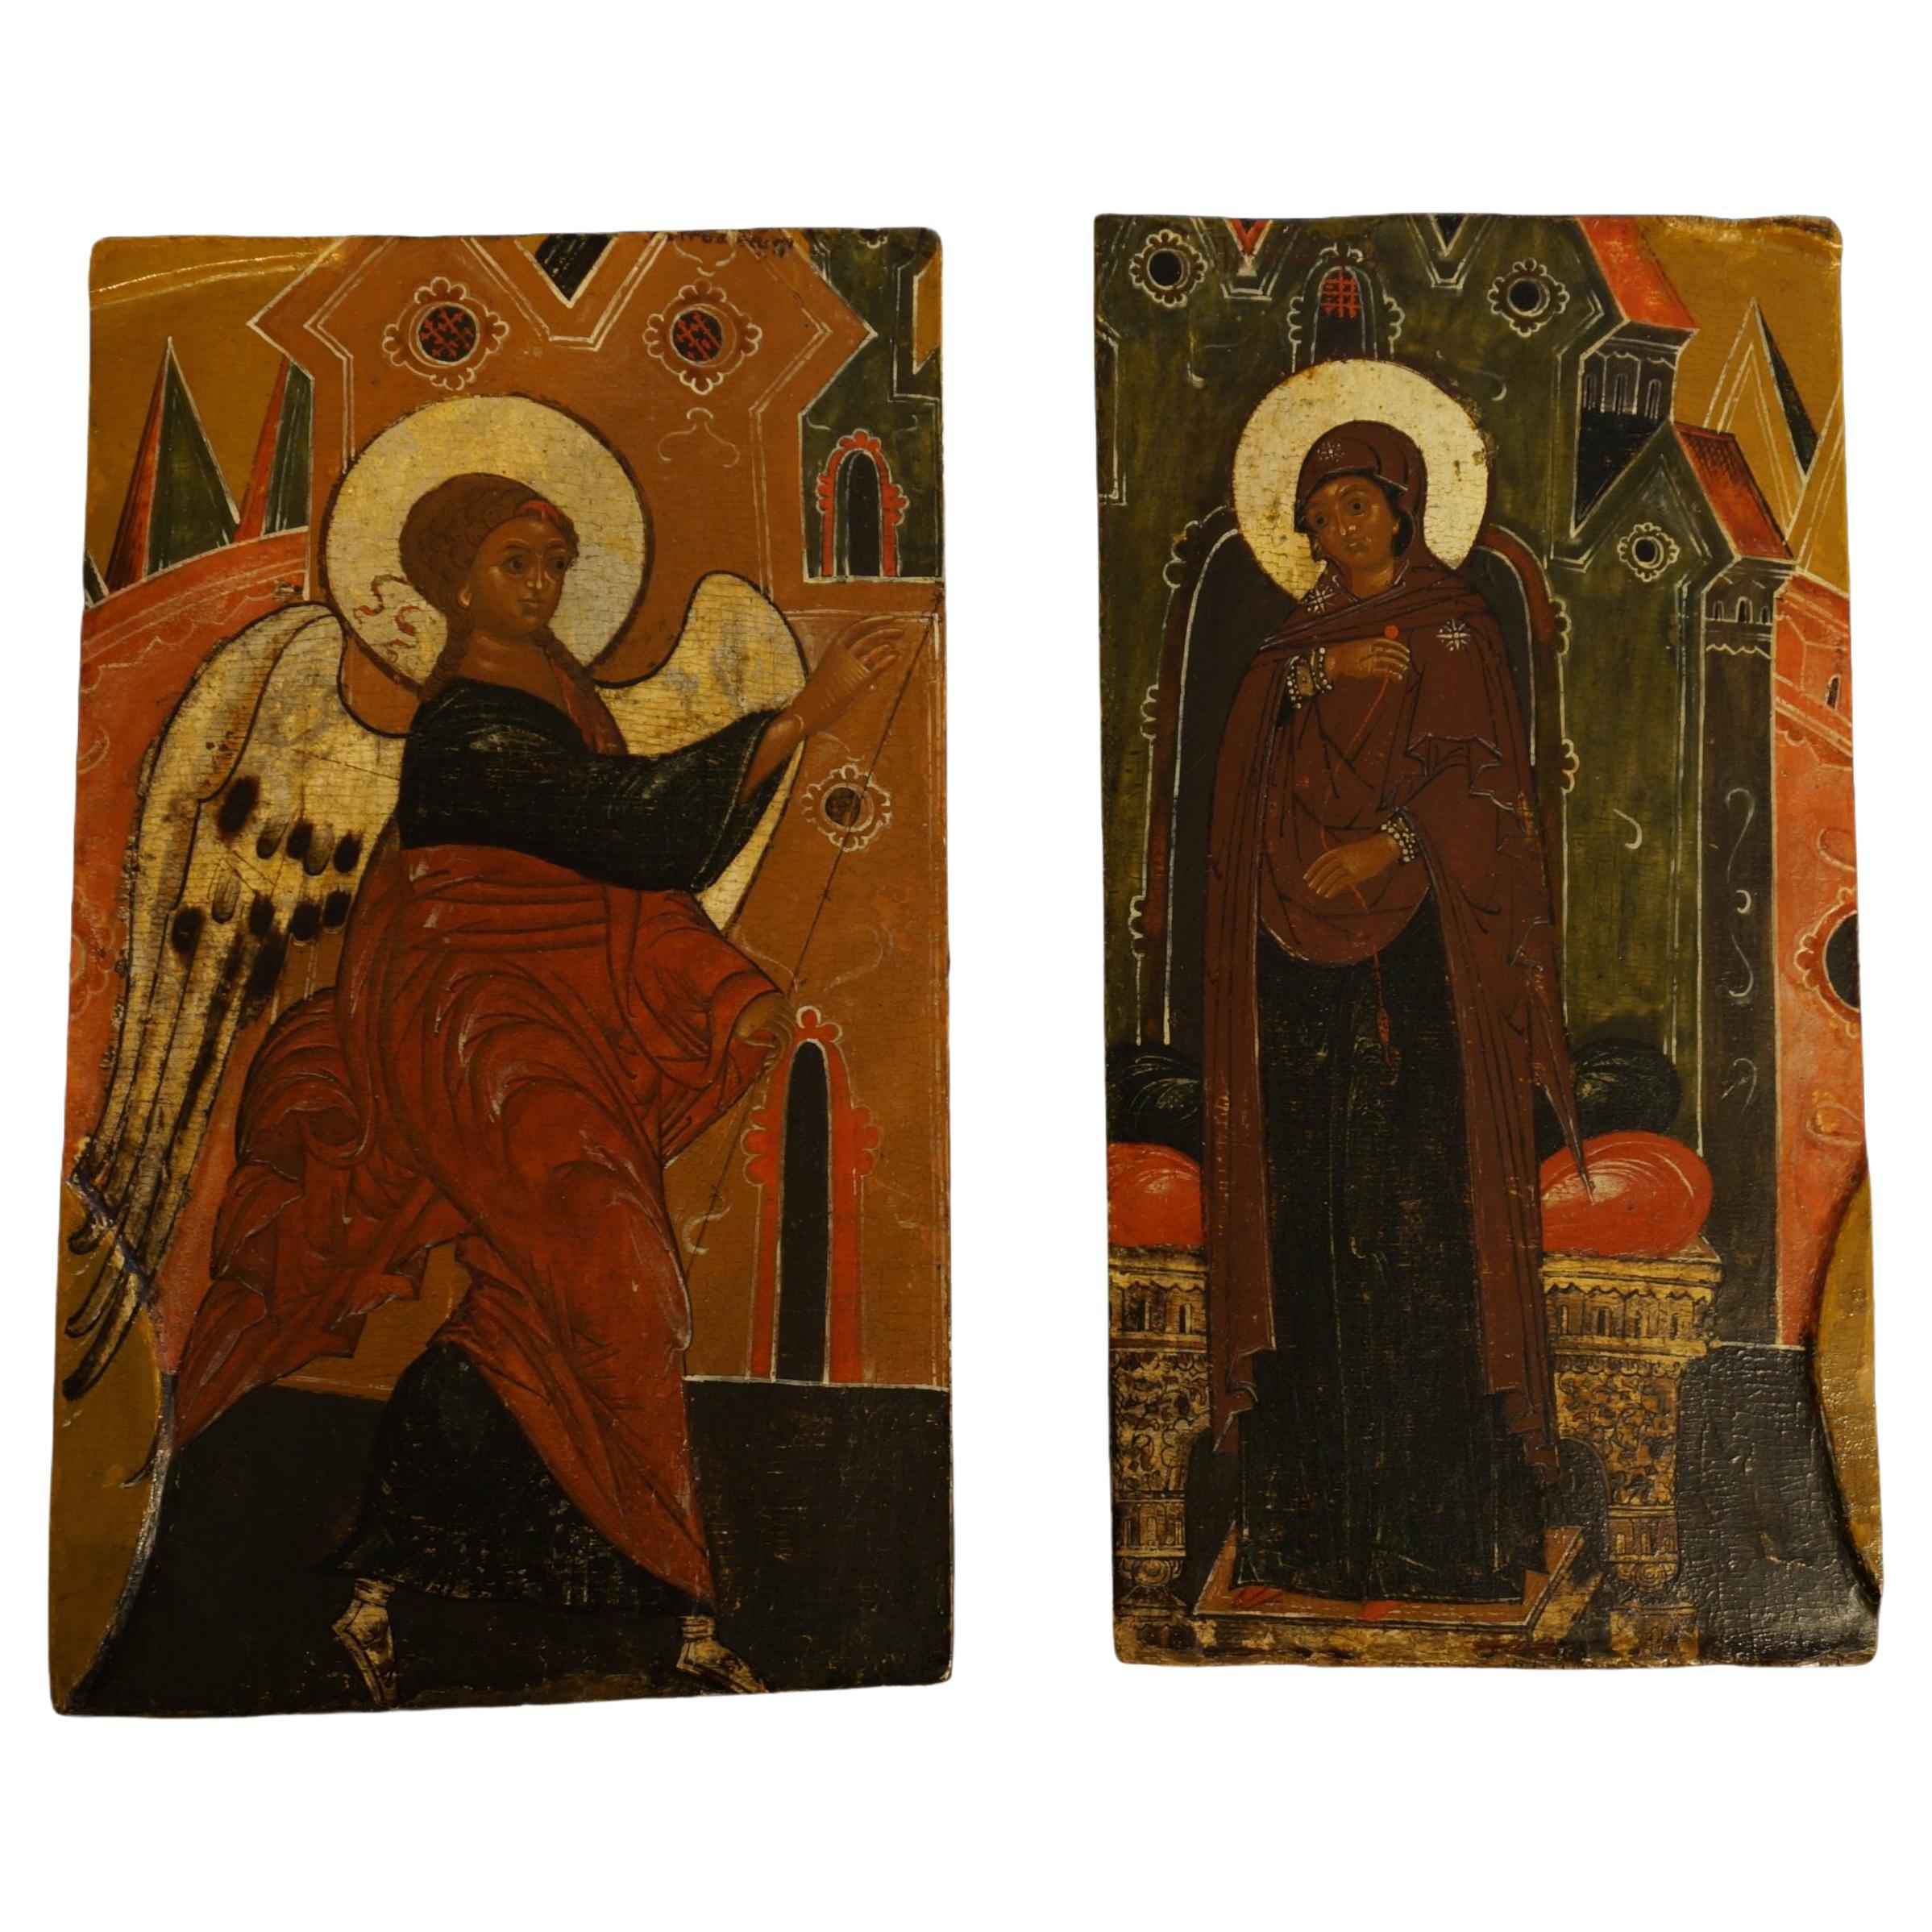 Two fragments from a 17th century Royal Door from an iconostasis, Annunciation